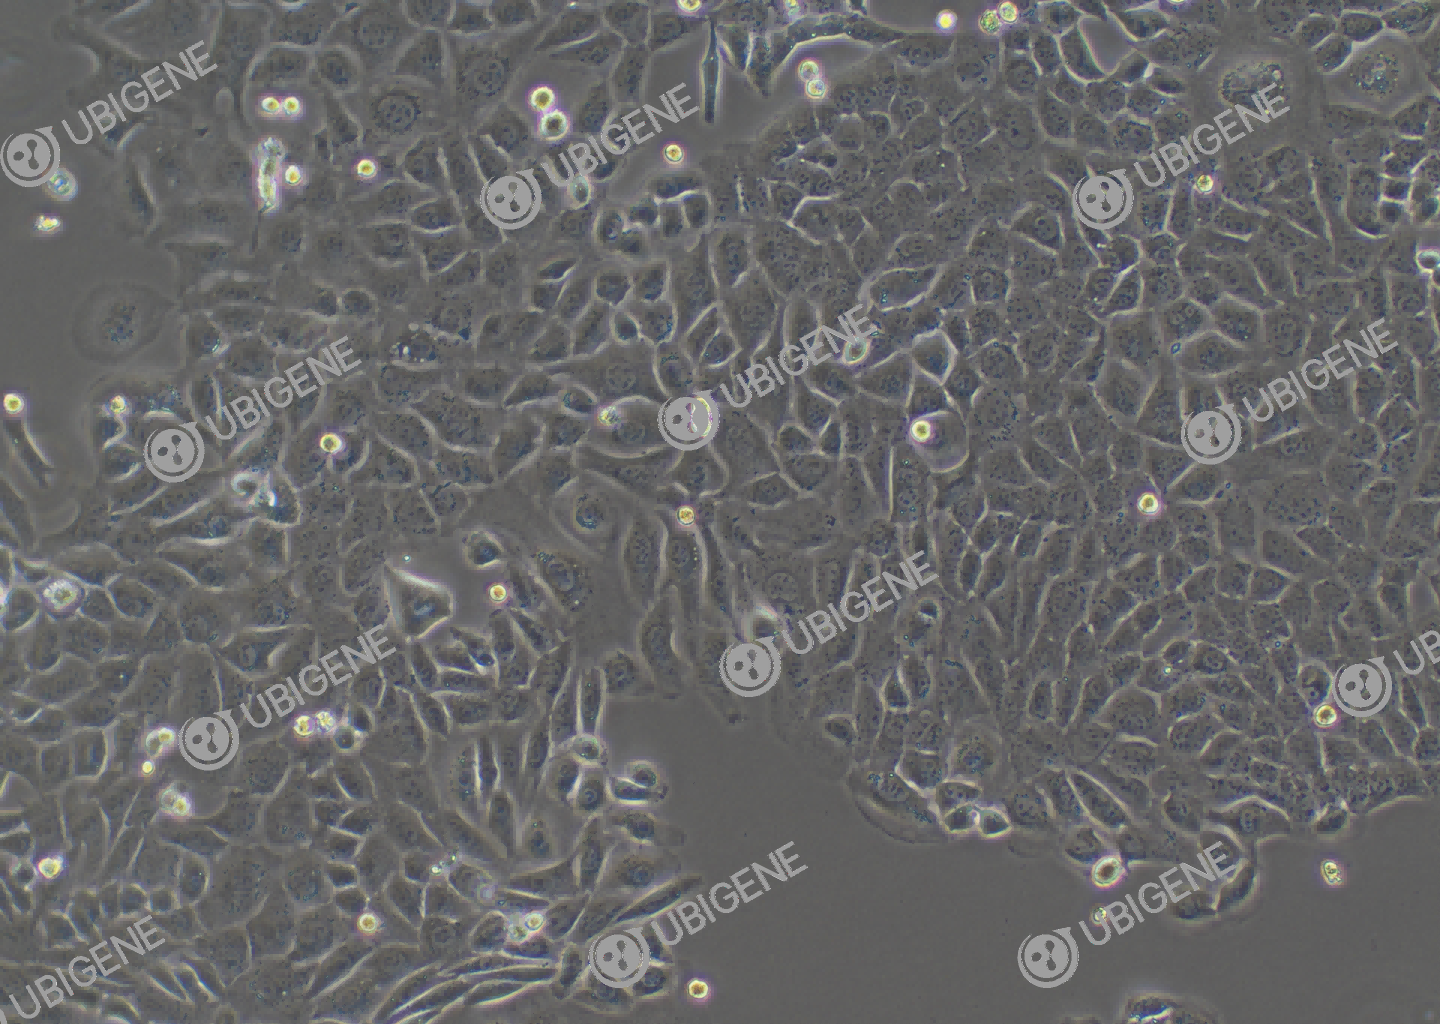 ID8 cell line Cultured cell morphology